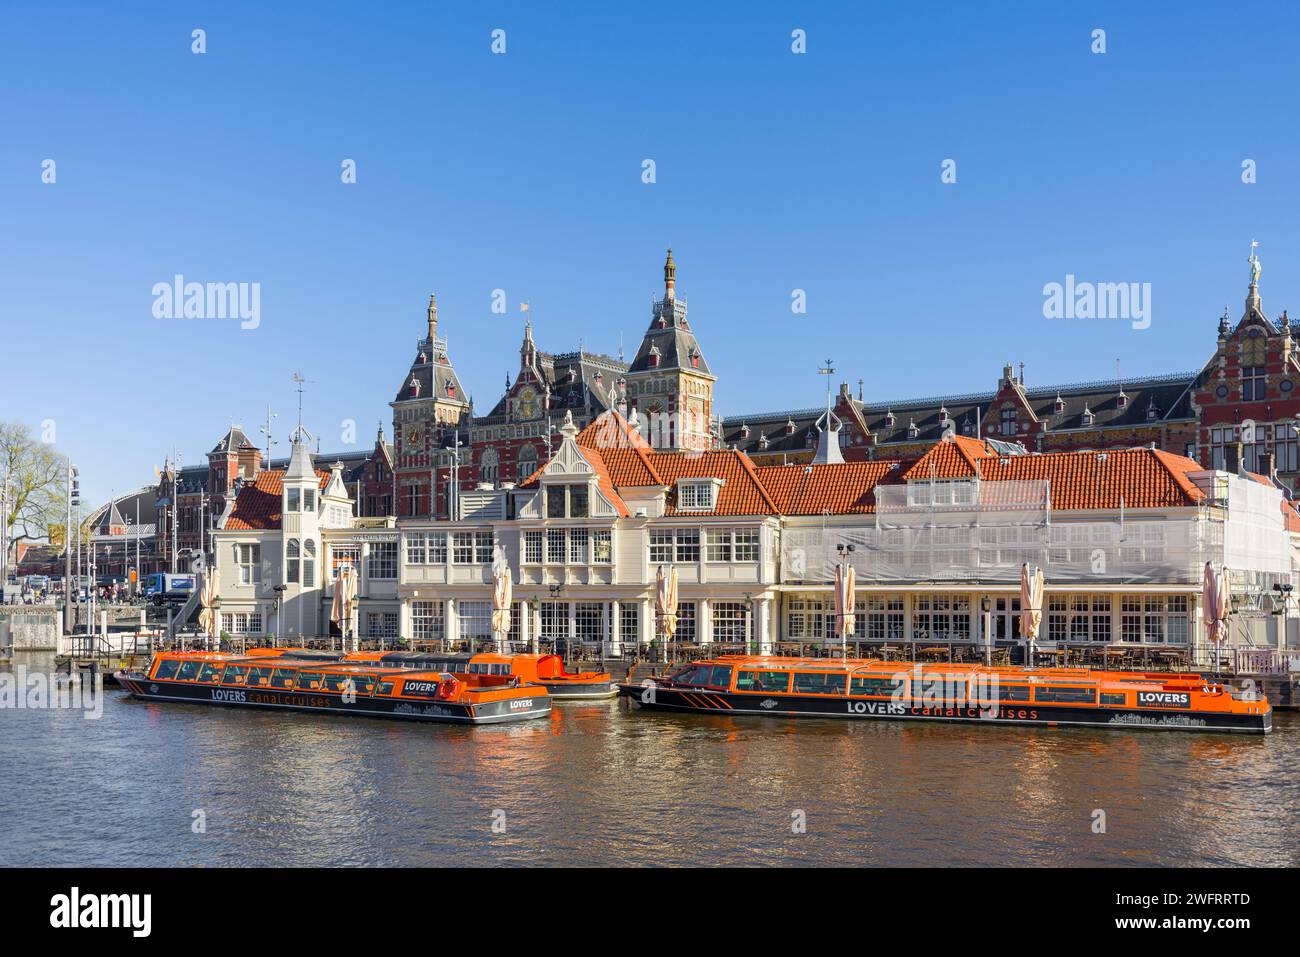 Pleasure Cruisers moored up on a canal in Amsterdam, North Holland, Netherlands. Stock Photo